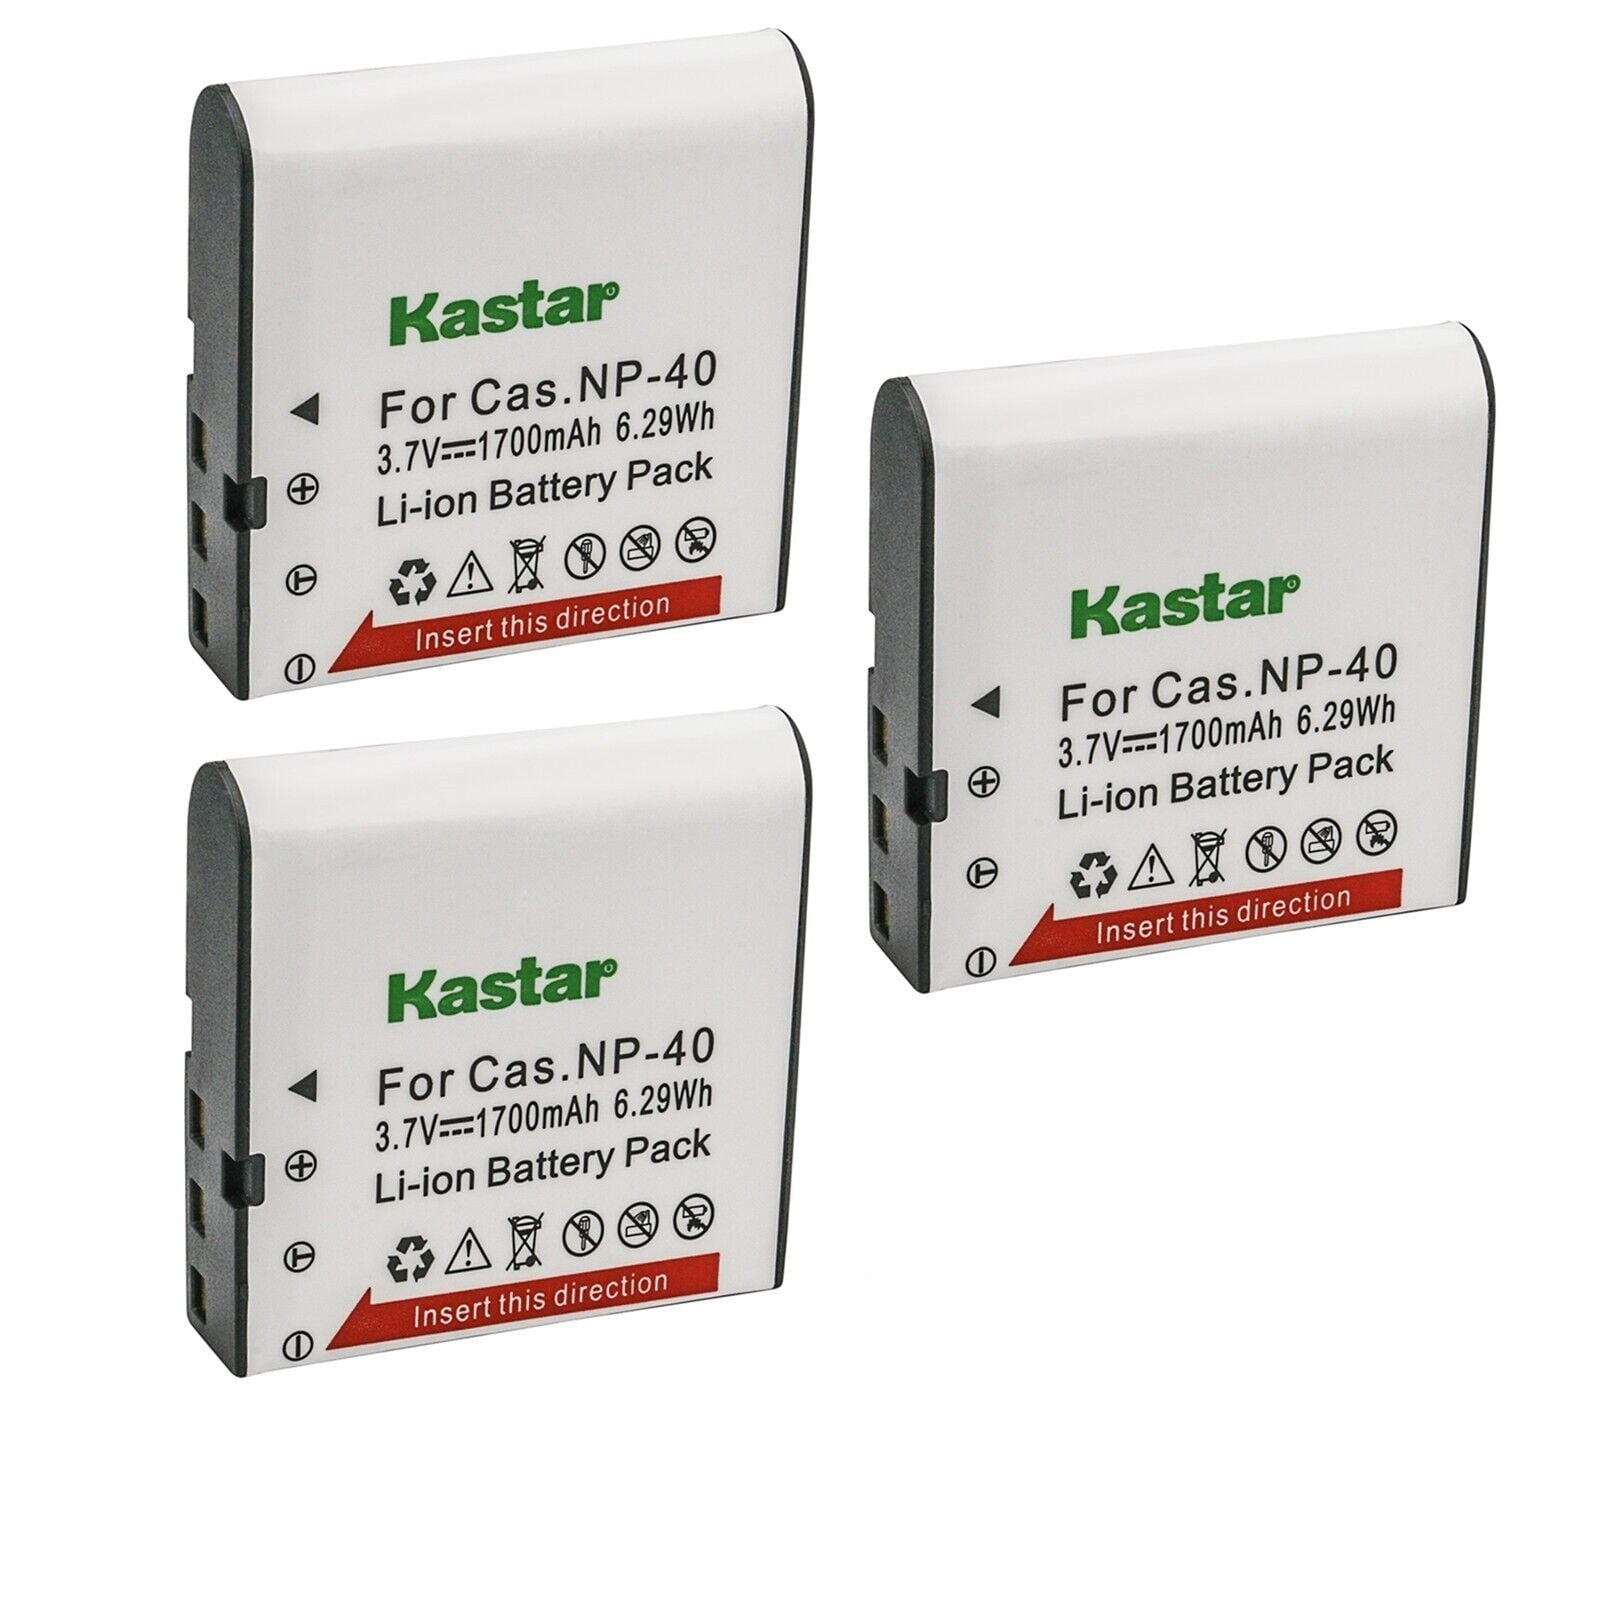 Kastar 2-Pack Battery CNP40 Replacement for Casio Exilim EX-FC160S, Exilim  Pro EX-P505, Exilim Pro EX-P600, Exilim Pro EX-P700, Exilim Zoom EX-Z100,  Exilim Zoom EX-Z1000, Exilim Zoom EX-Z1050 Camera